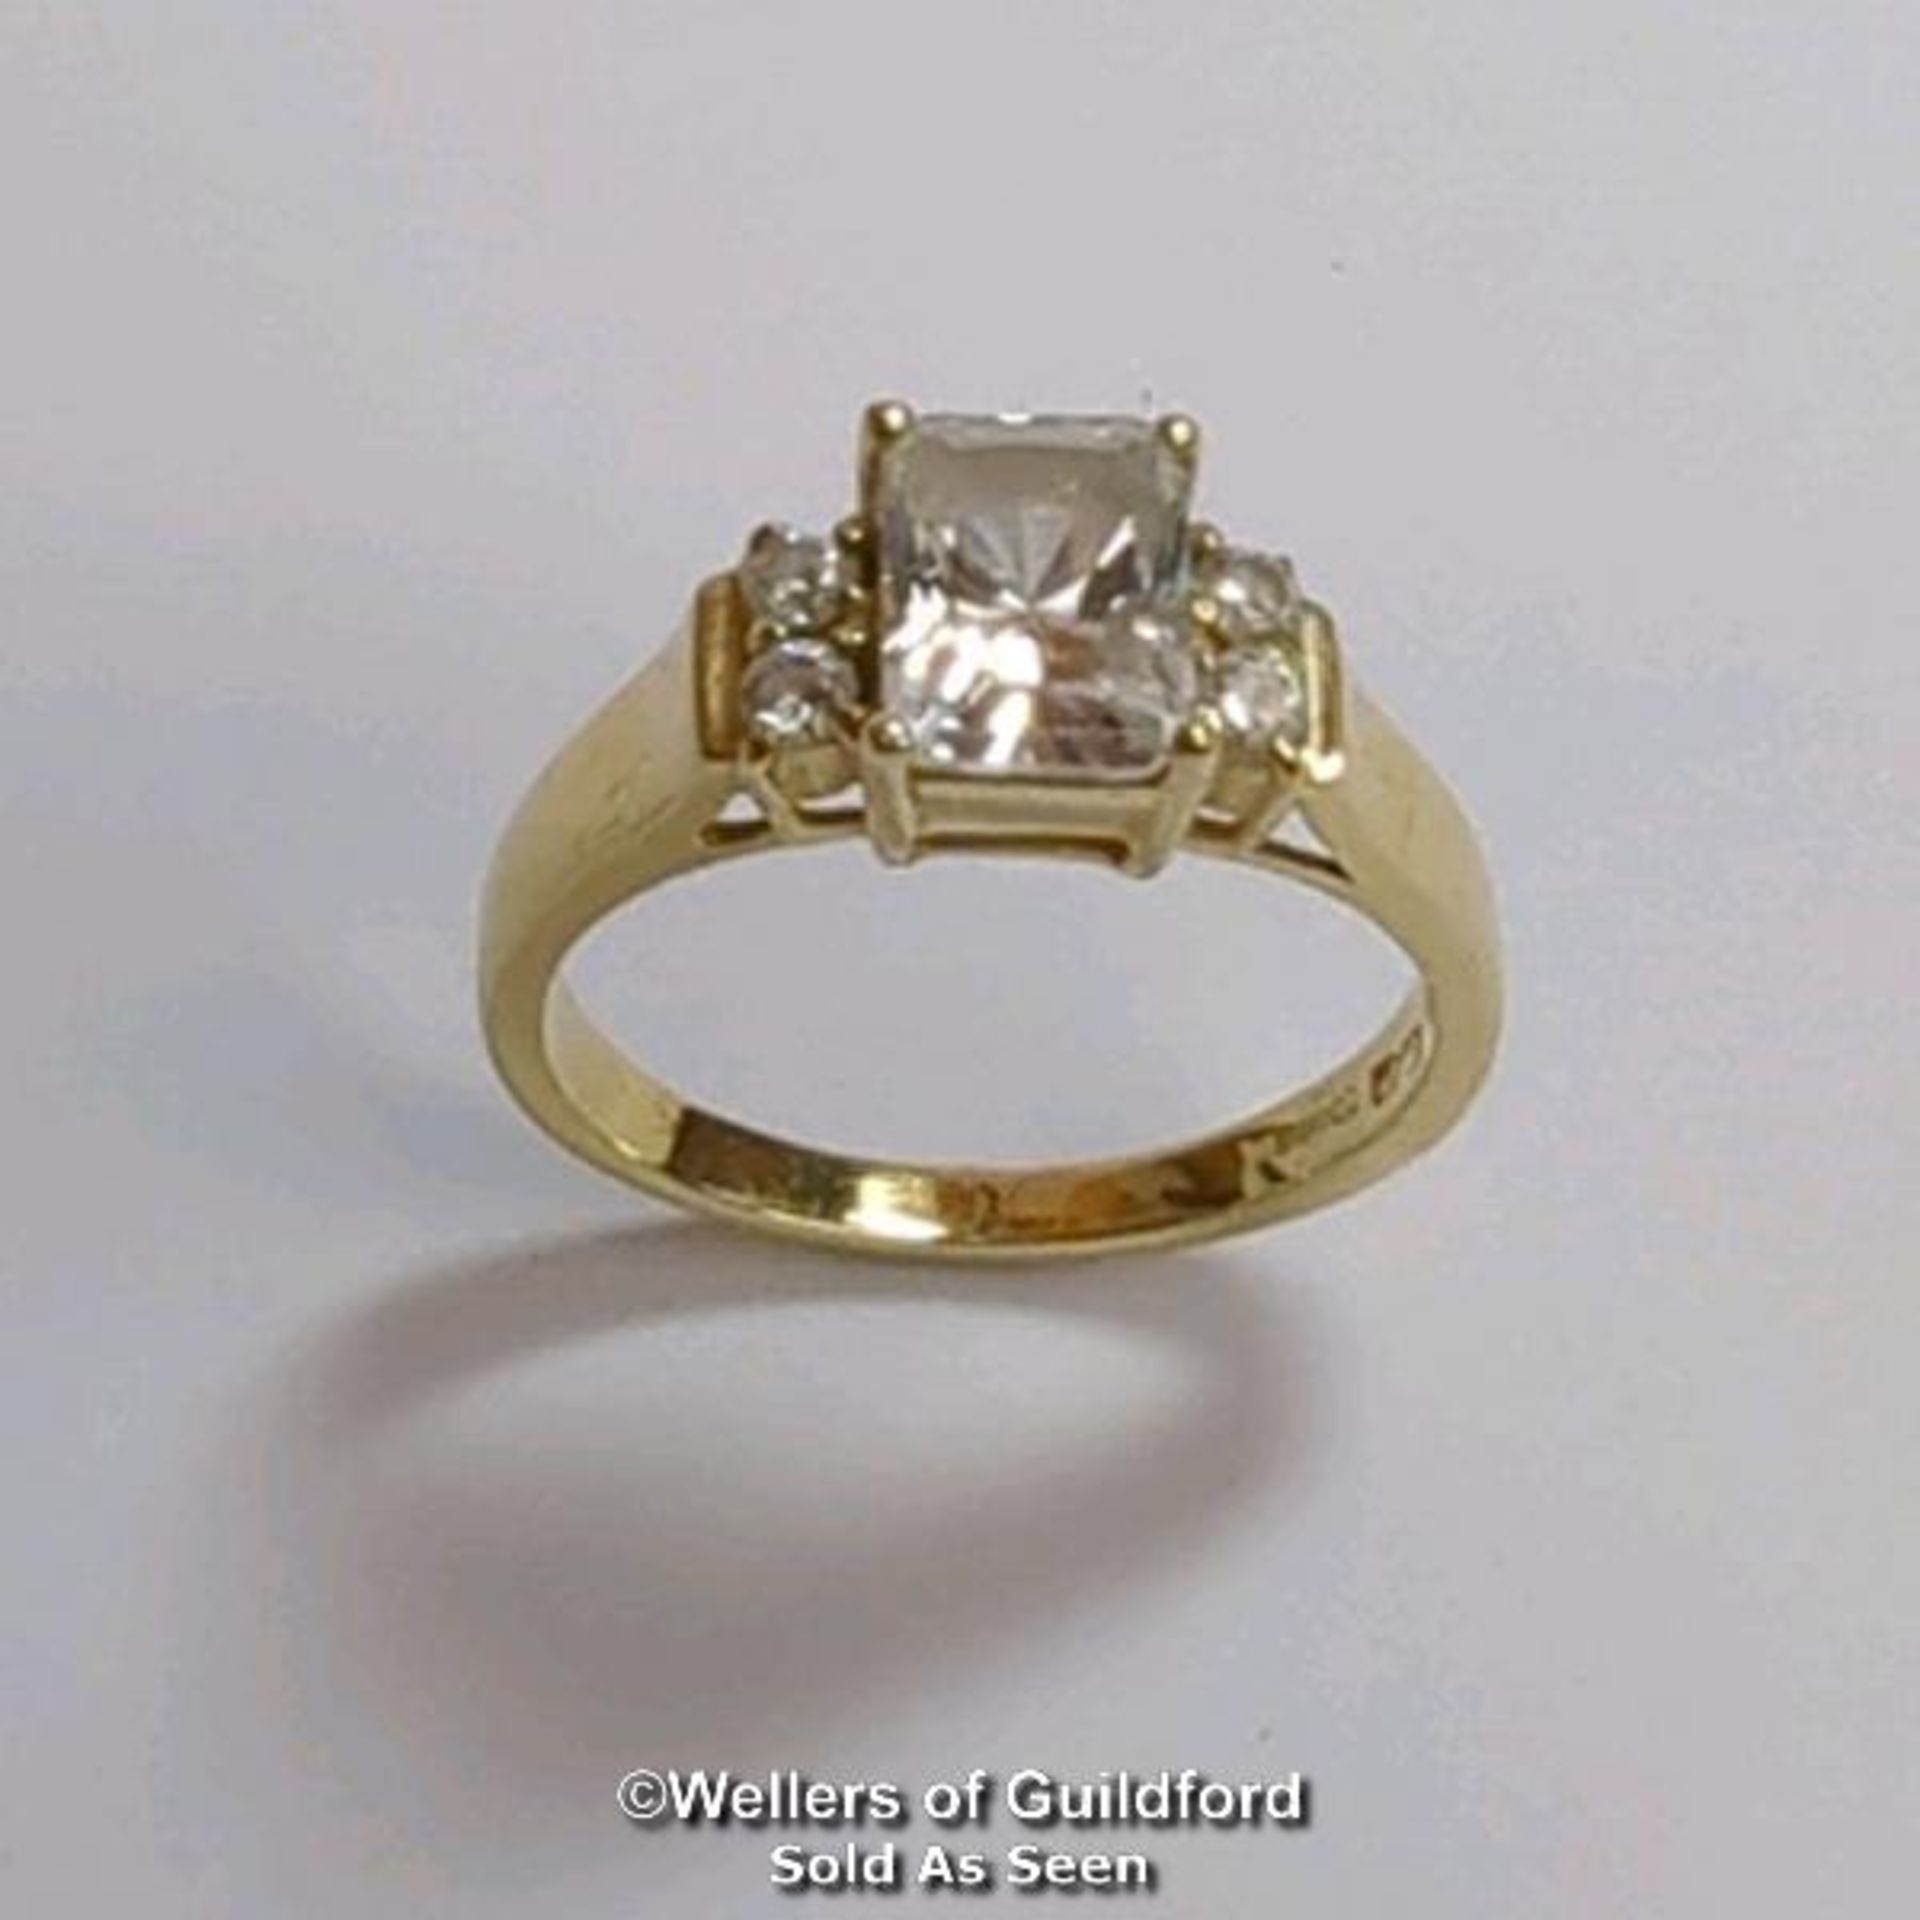 A cubic zirconia dress ring in hallmarked 14ct gold. The emerald cut centre stone measures 7mm x 5.